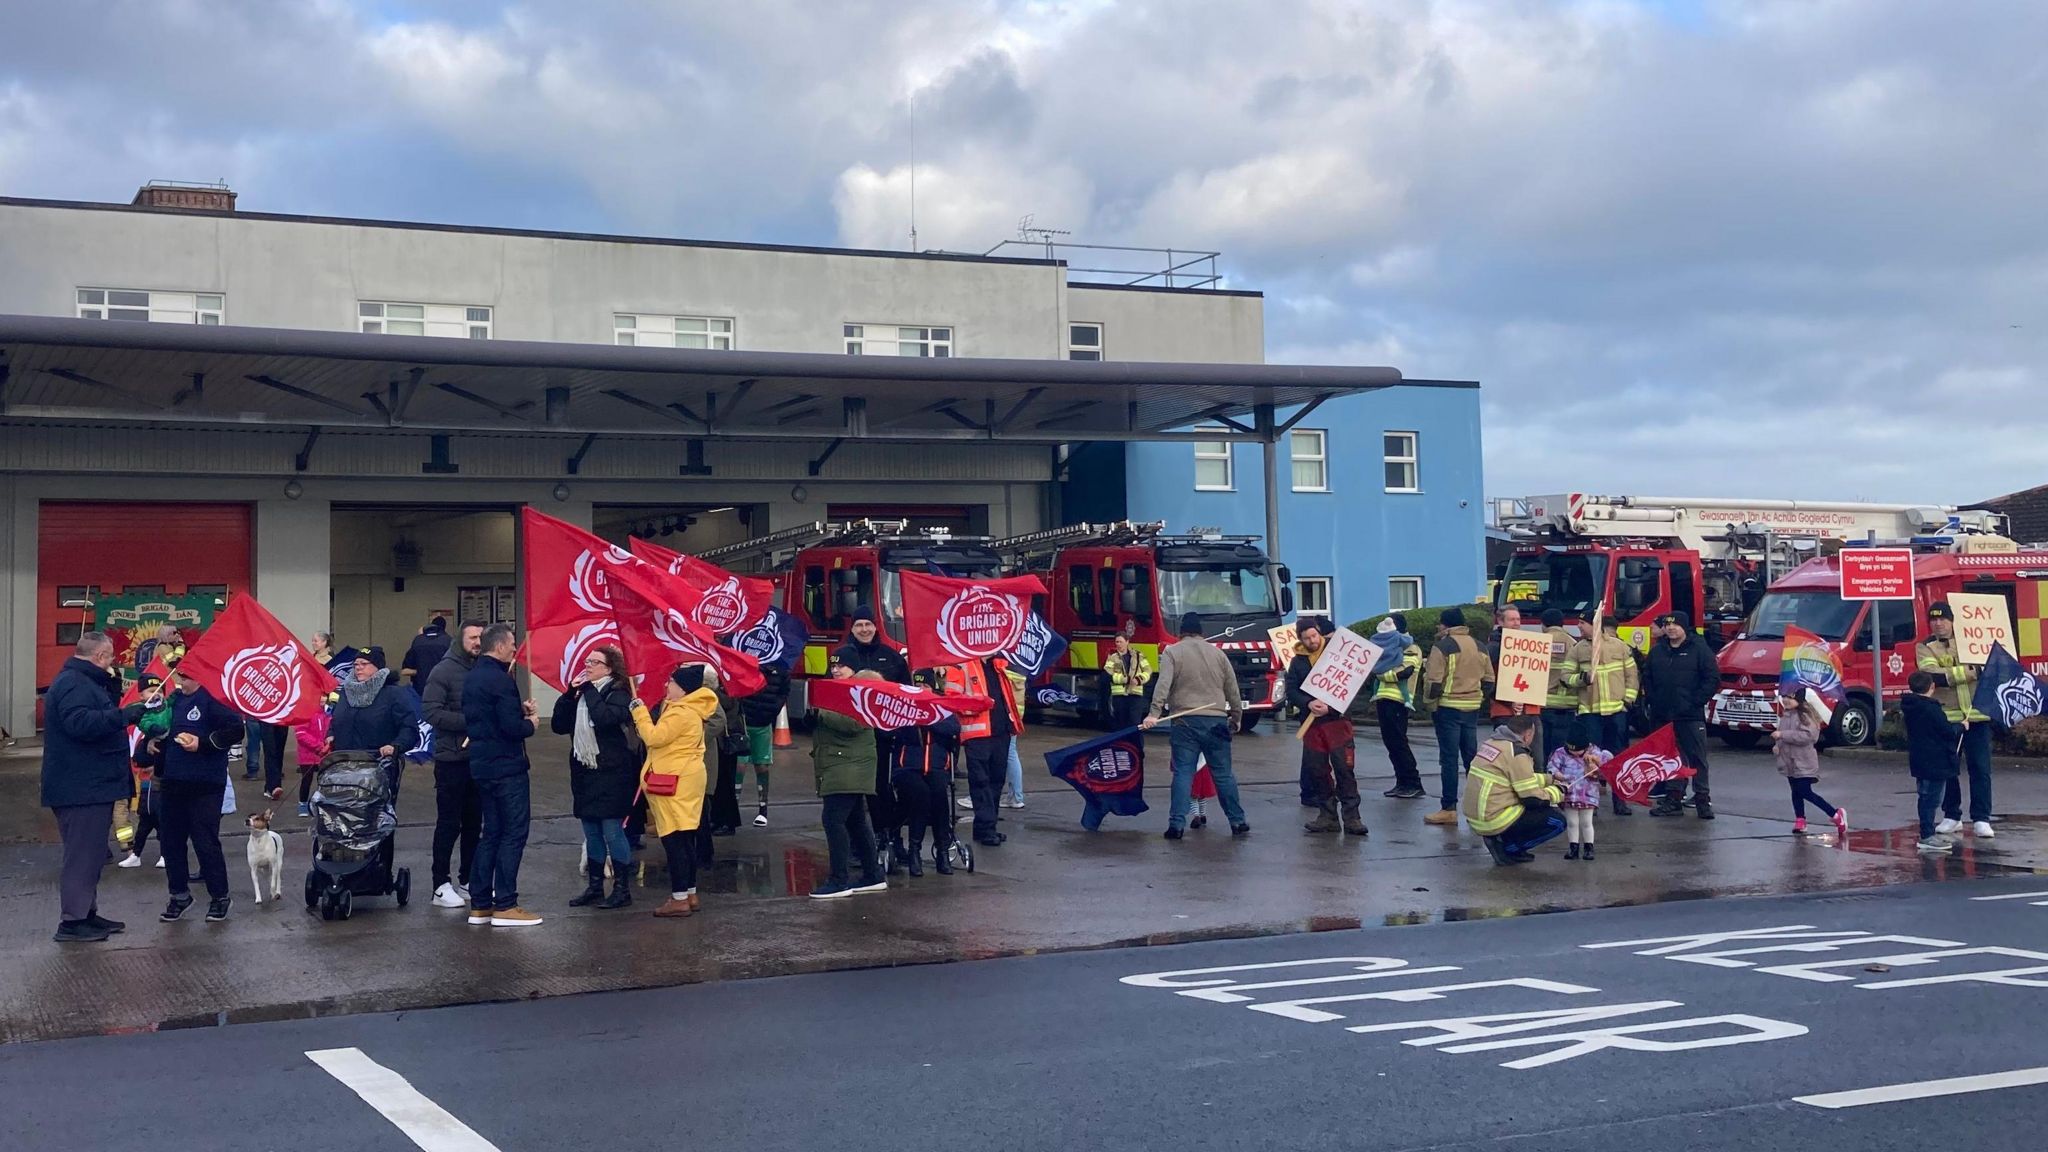 Placard-waving protesters outside Rhyl Fire Station